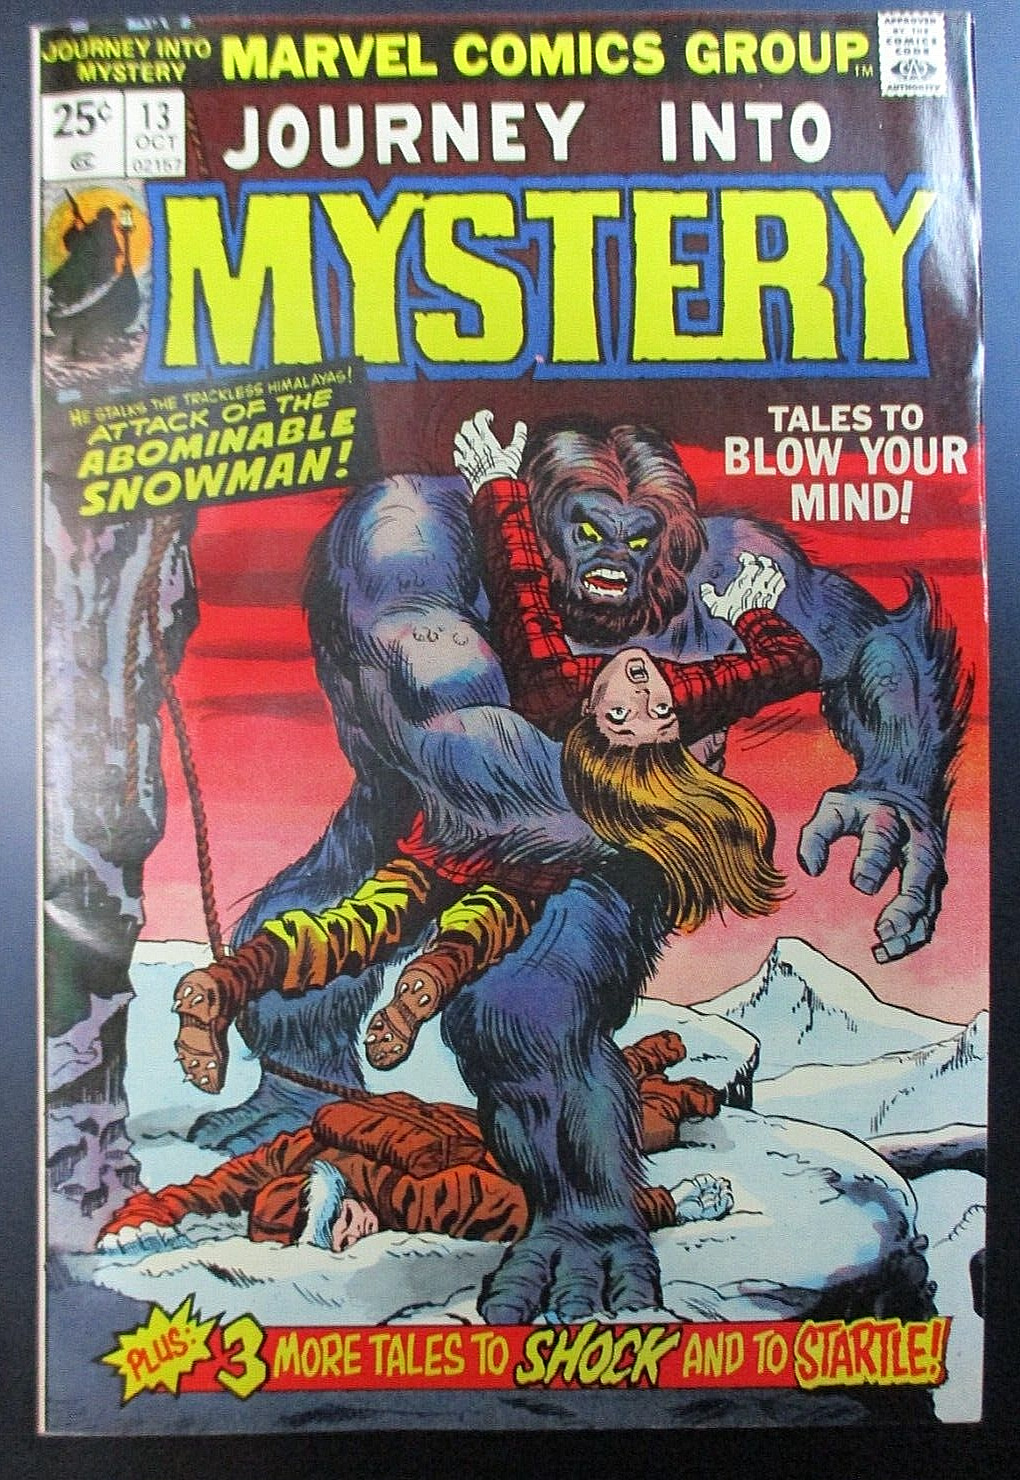 JOURNEY INTO MYSTERY 1974- #13 Attack of the Abominable Snowman VF|NM +